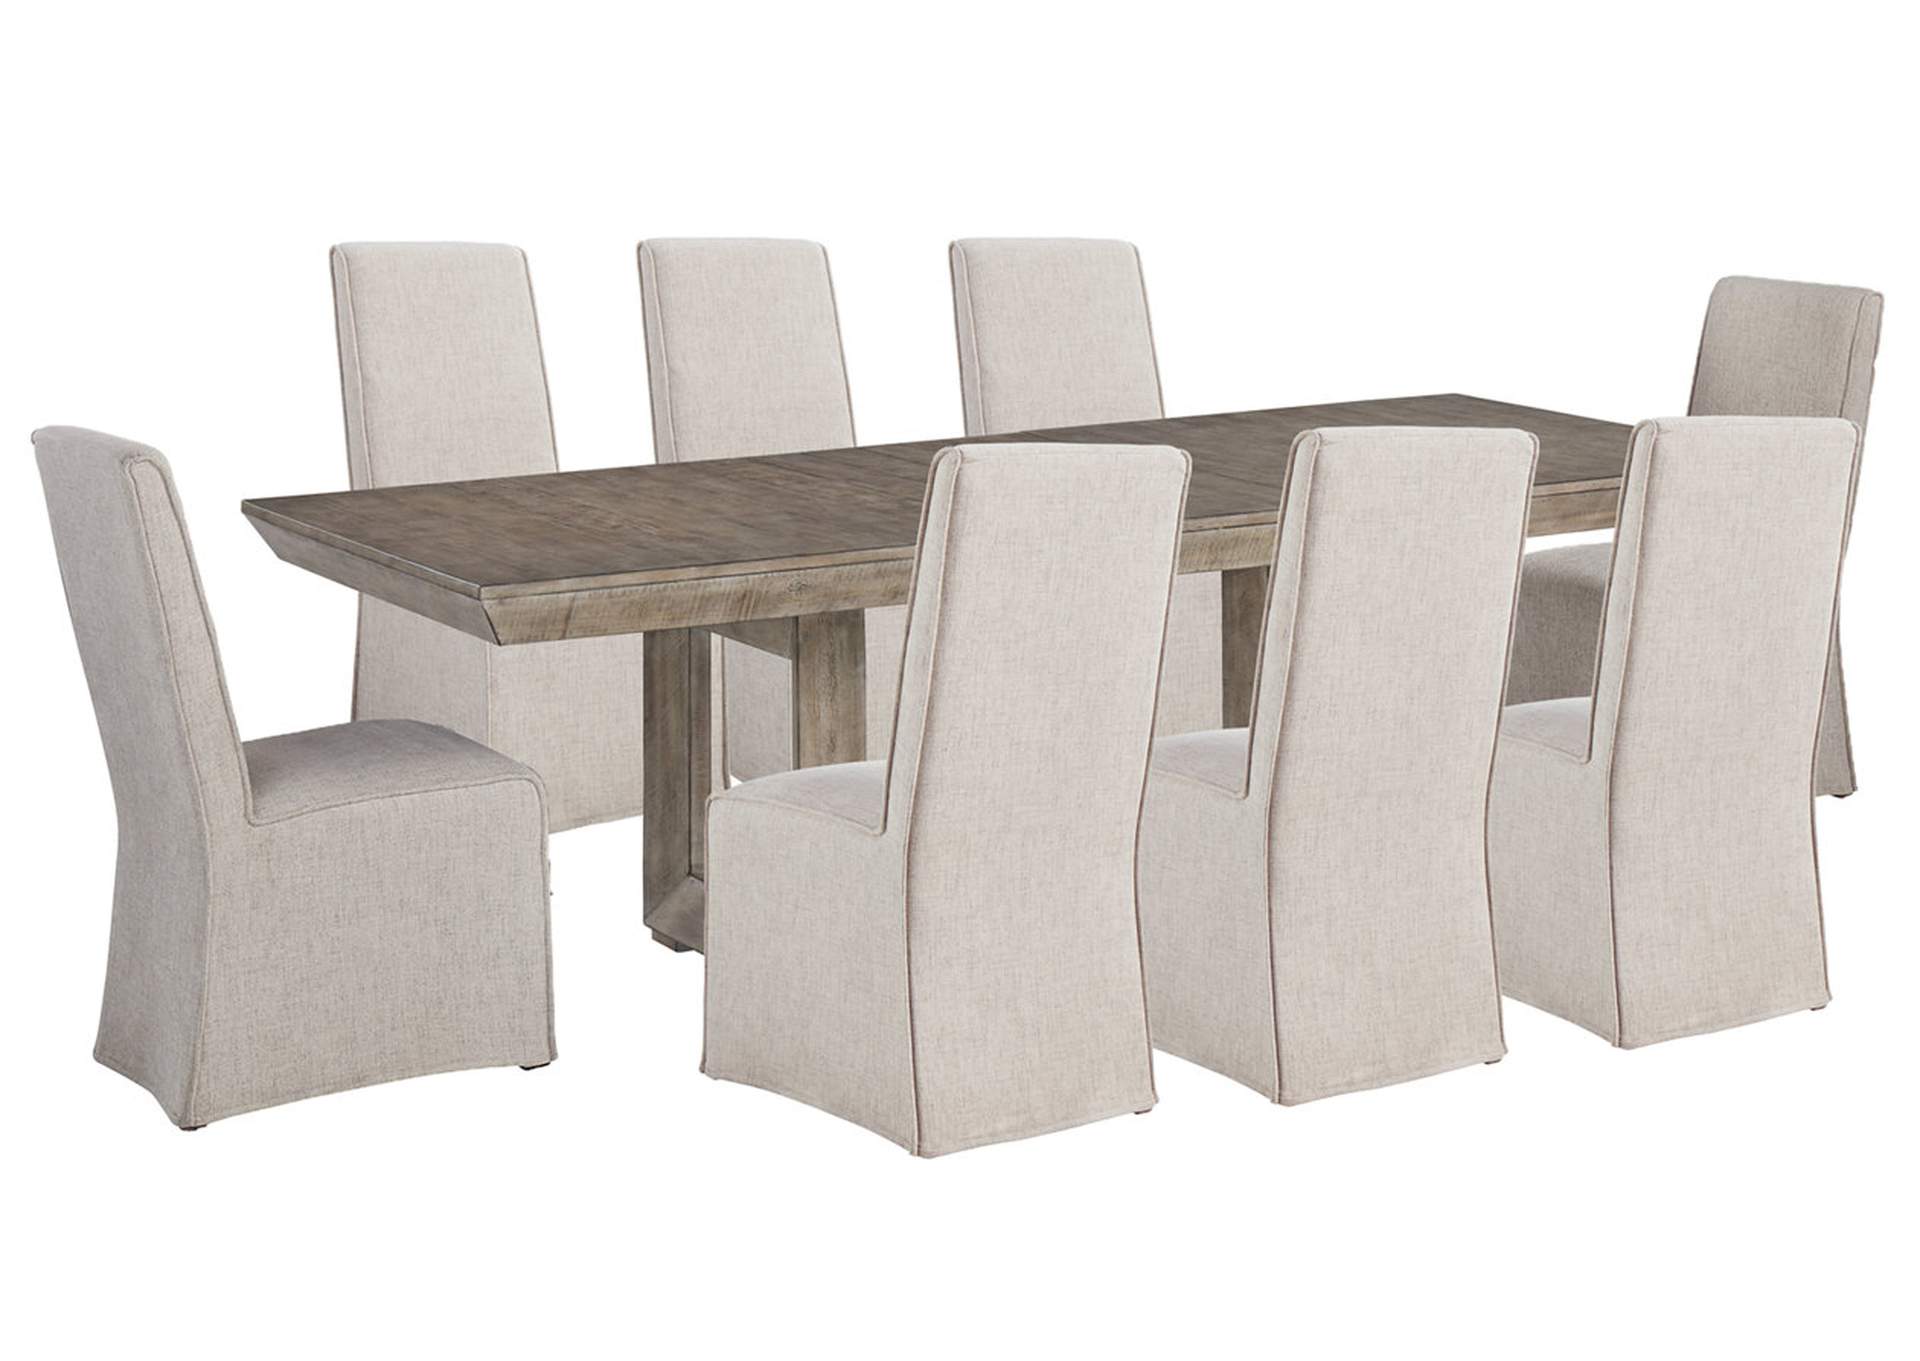 Langford Dining Table and 8 Chairs,Millennium